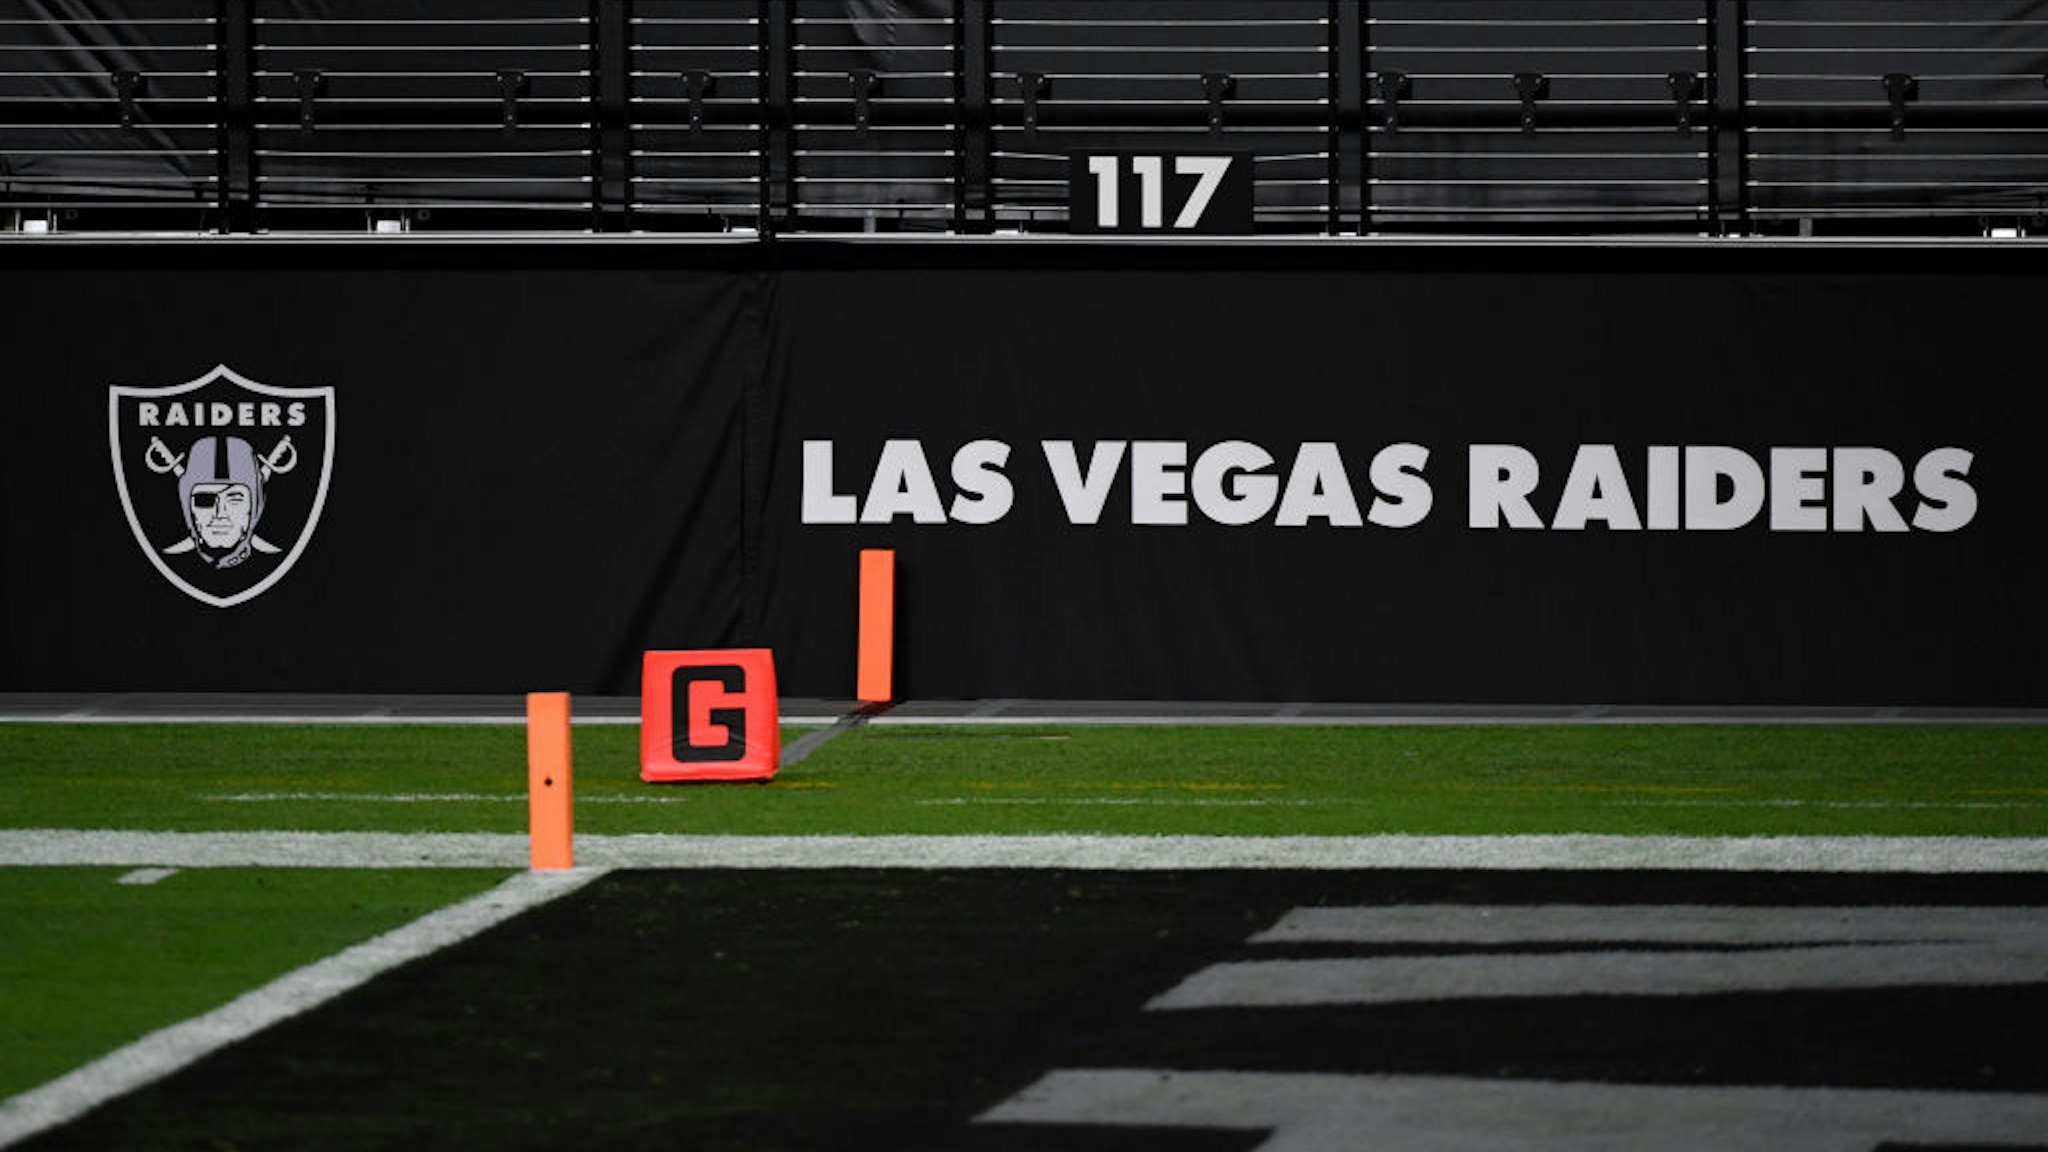 LAS VEGAS, NEVADA - DECEMBER 17: Las Vegas Raiders logos are shown on a wall before a game between the Raiders and the Los Angeles Chargers at Allegiant Stadium on December 17, 2020 in Las Vegas, Nevada. The Chargers defeated the Raiders 30-27 in overtime.